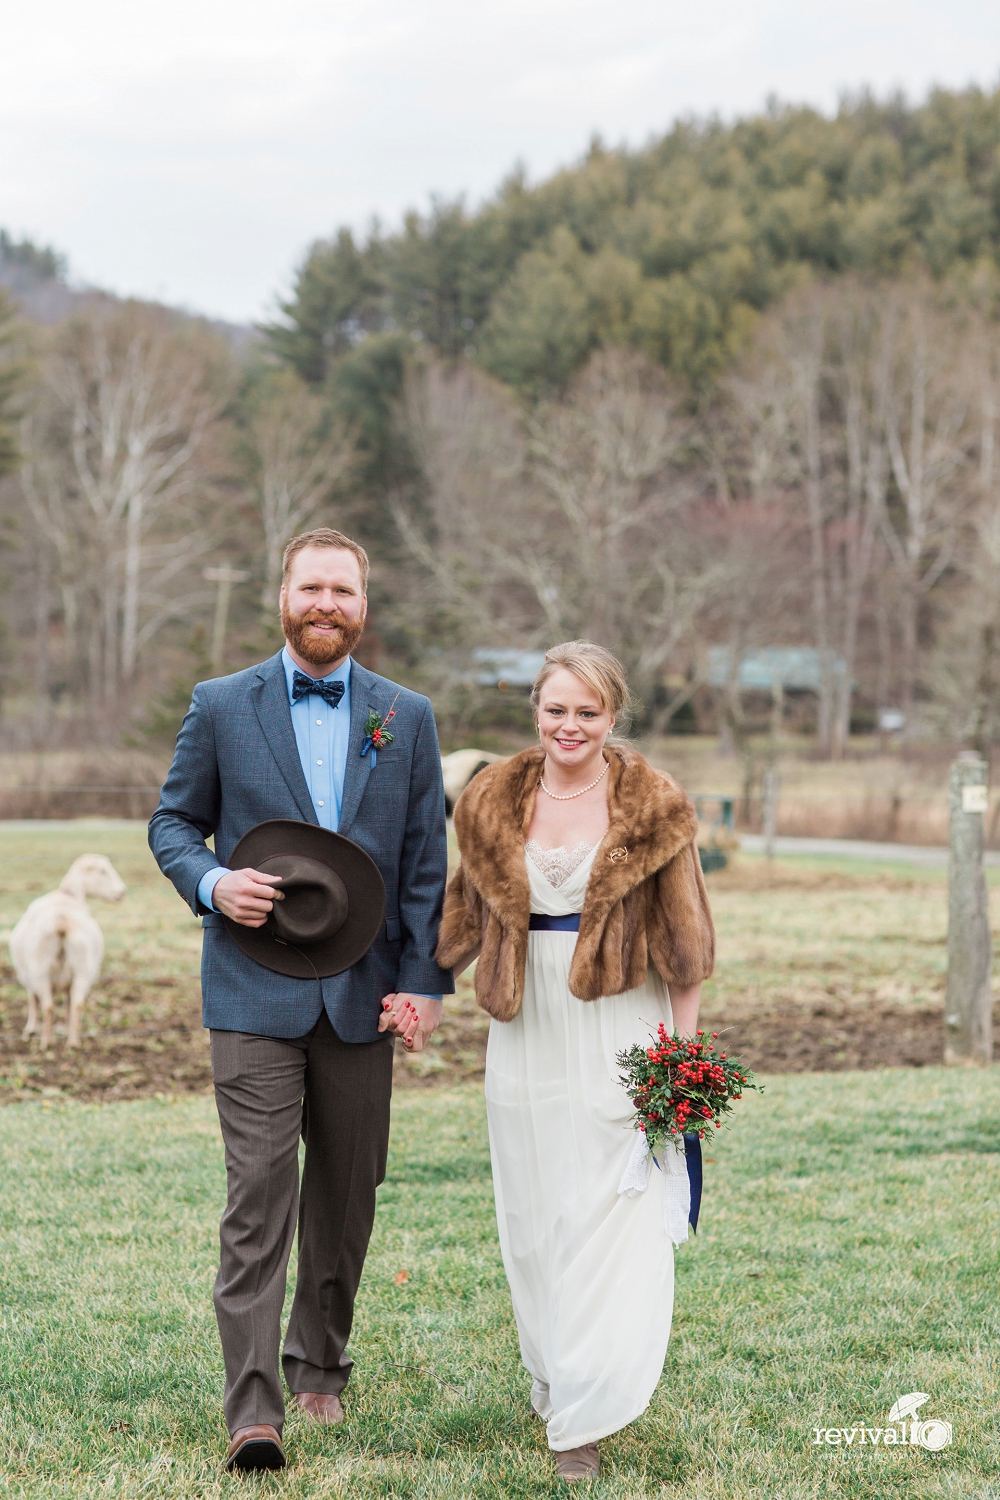 Photos by Revival Photography Vintage Inspired Winter Elopement on New Years Eve Mast Farm Inn www.revivalphotography.com